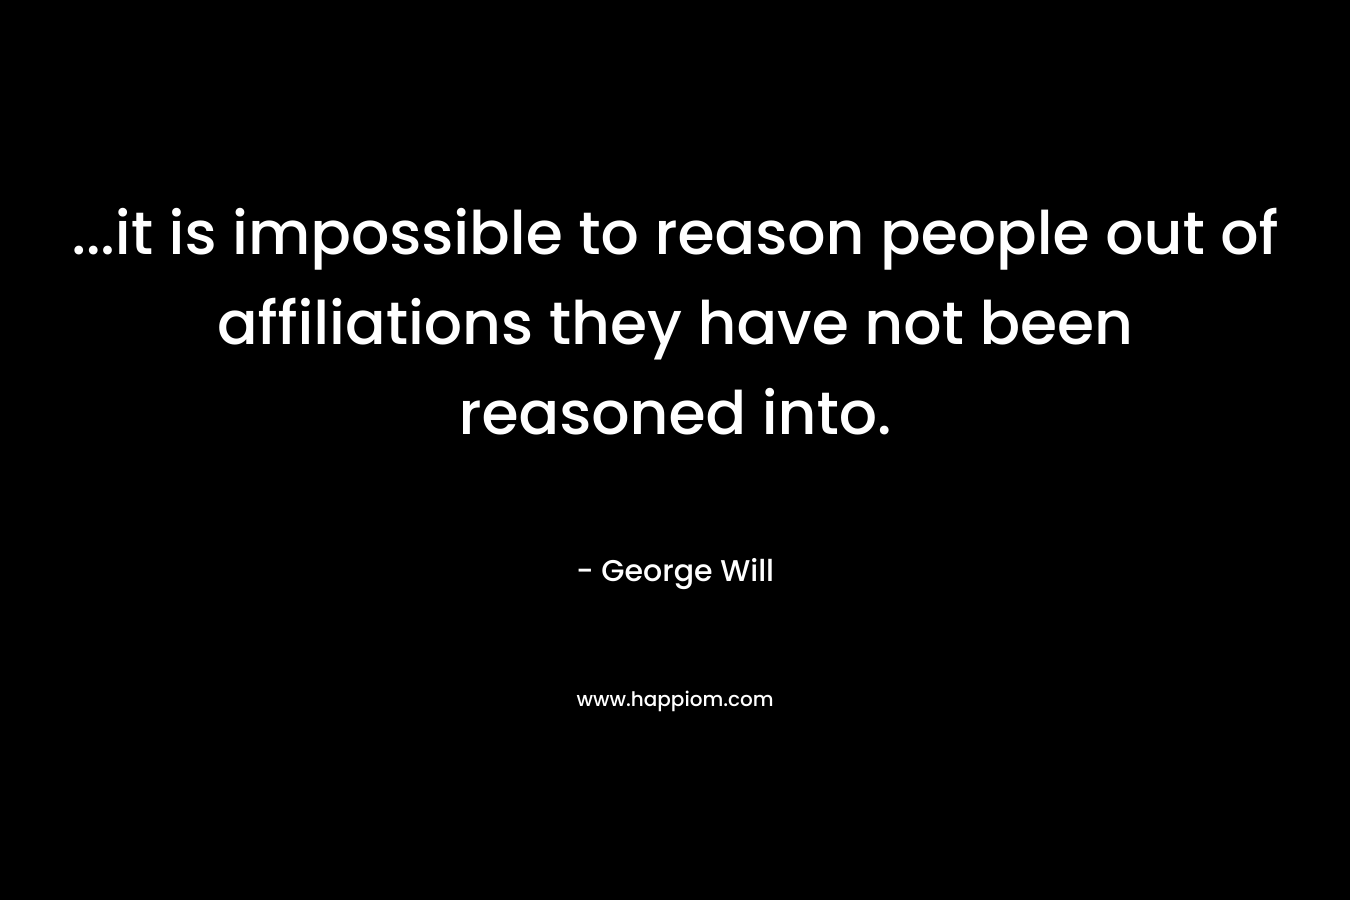 ...it is impossible to reason people out of affiliations they have not been reasoned into.